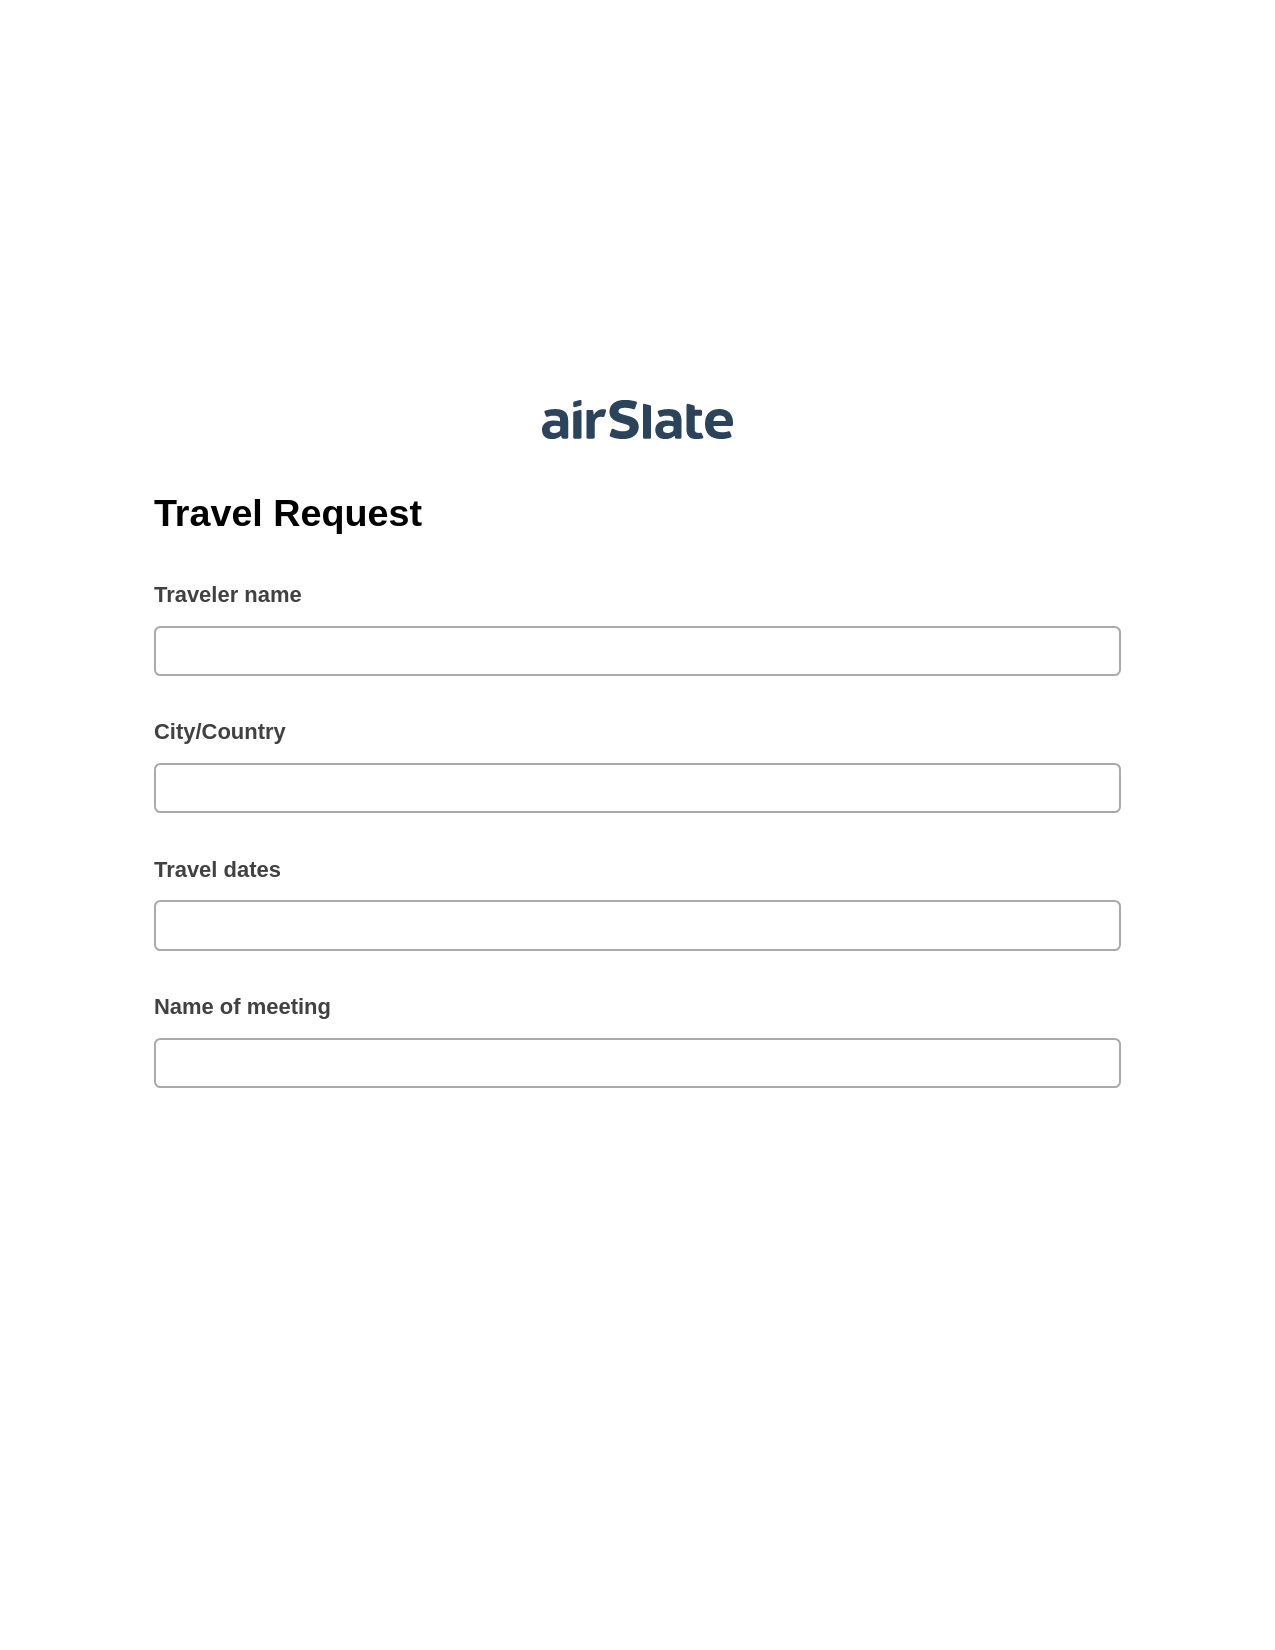 Travel Request Pre-fill Slate from MS Dynamics 365 Records Bot, Google Cloud Print Bot, Google Drive Bot